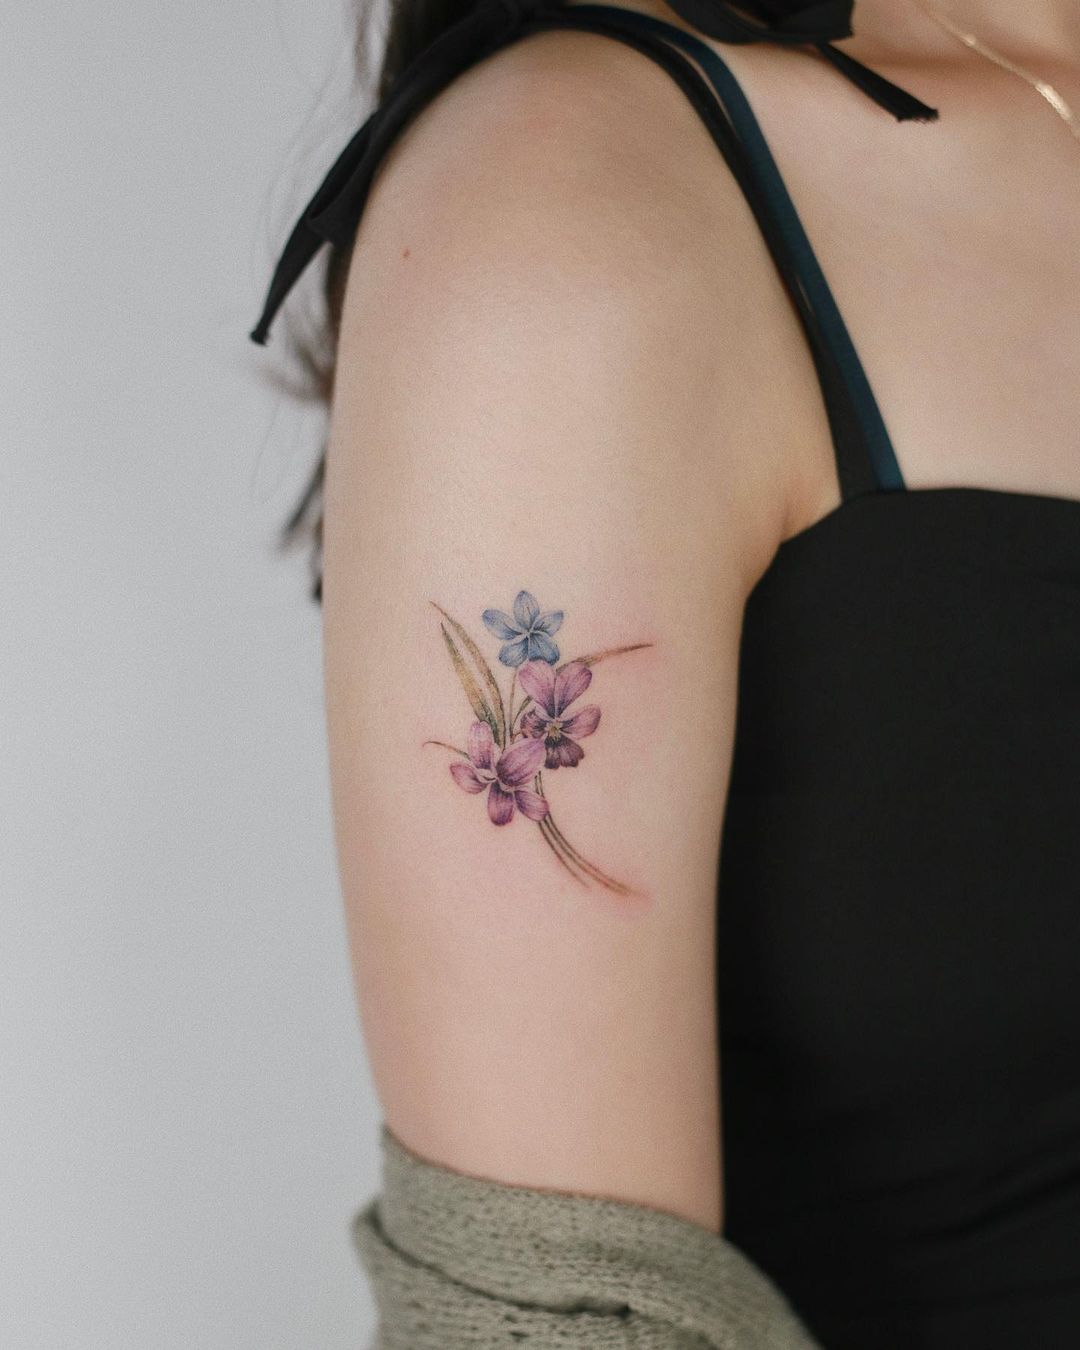 Cute wildflowers from this morning thanks Holly   Life tattoos Small  tattoos Minimalist tattoo